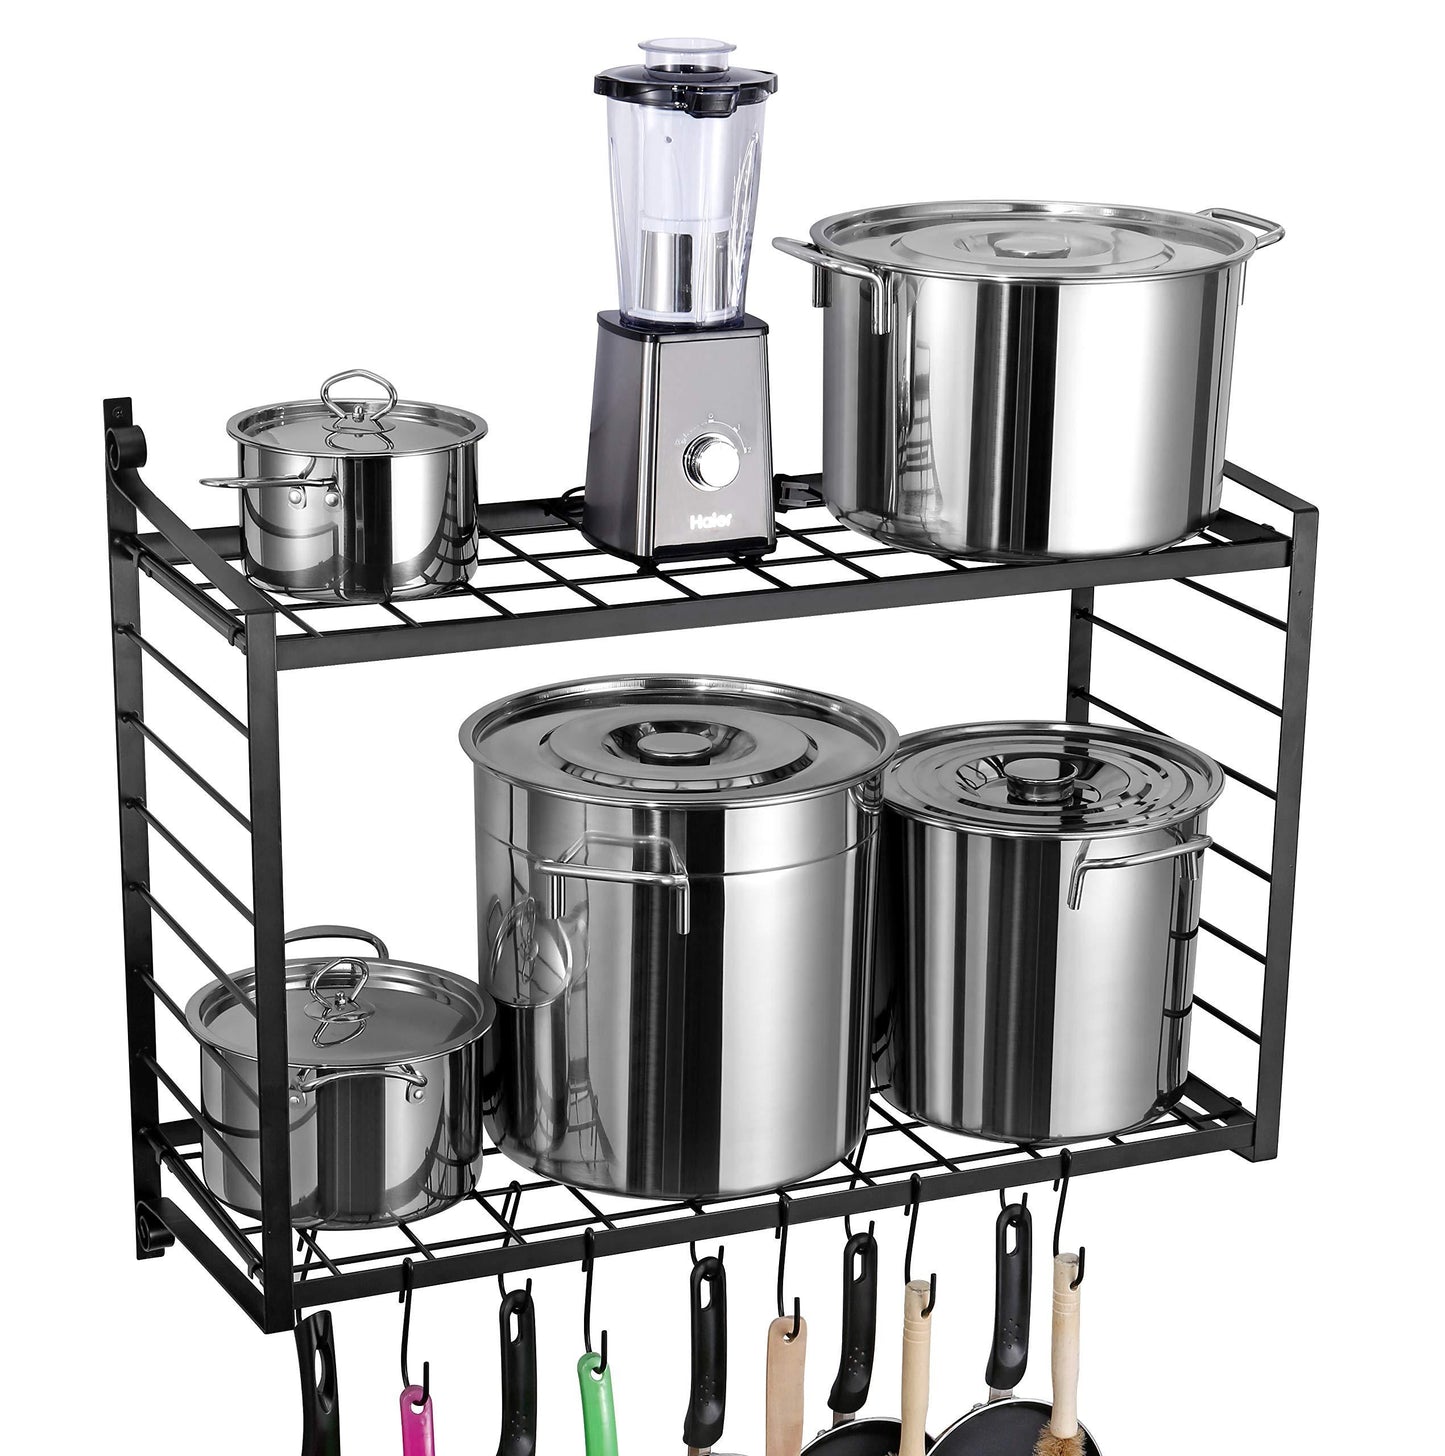 SparkWorks 2-Tiered Wall Mounted Pot Rack